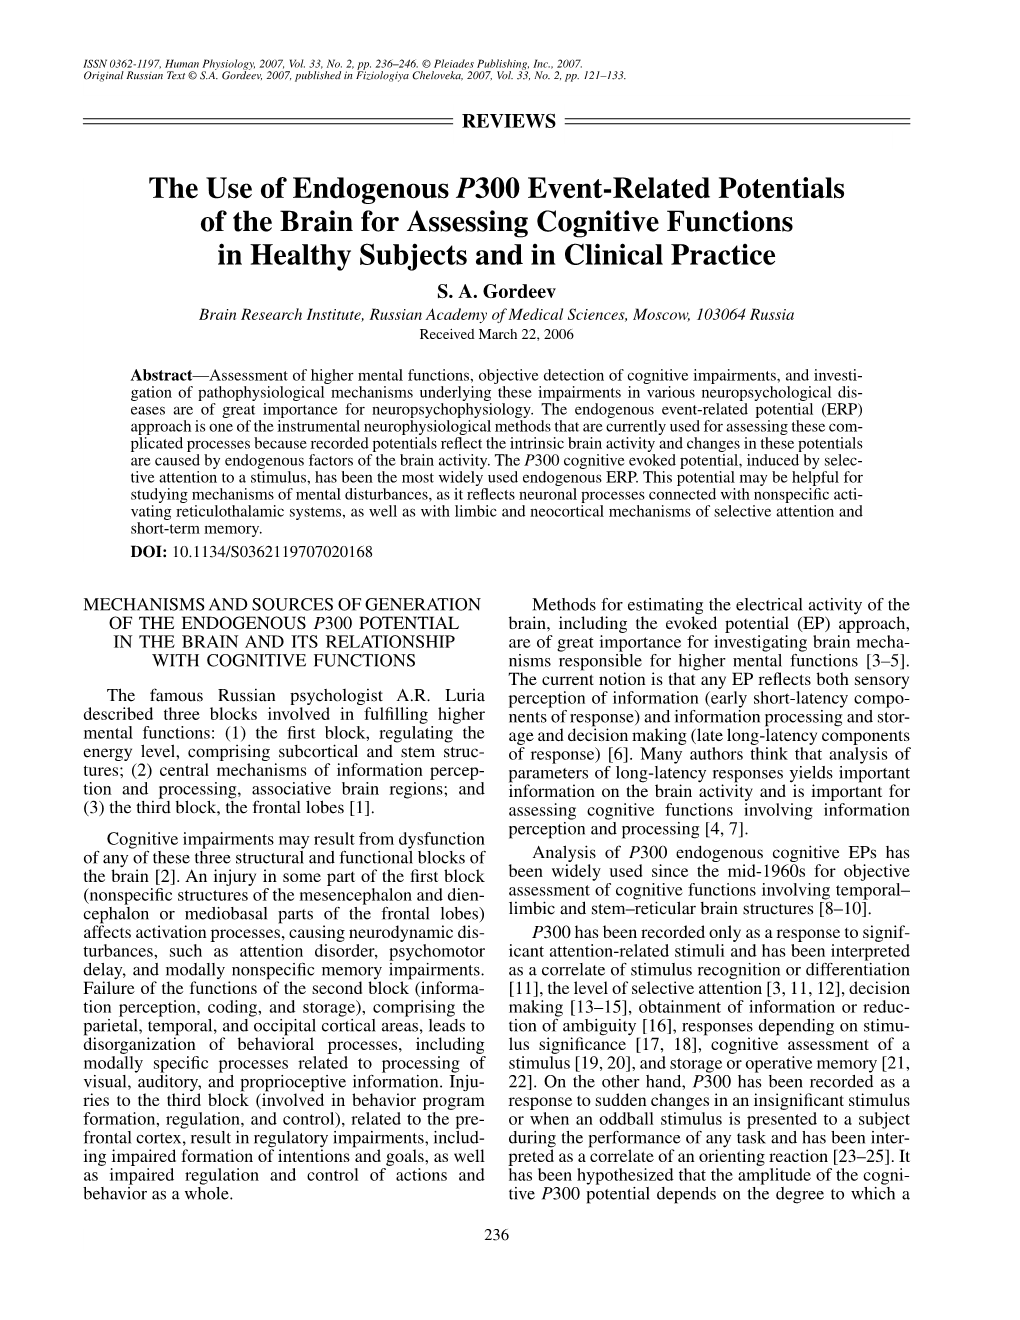 The Use of Endogenous P300 Event-Related Potentials of the Brain for Assessing Cognitive Functions in Healthy Subjects and in Clinical Practice S